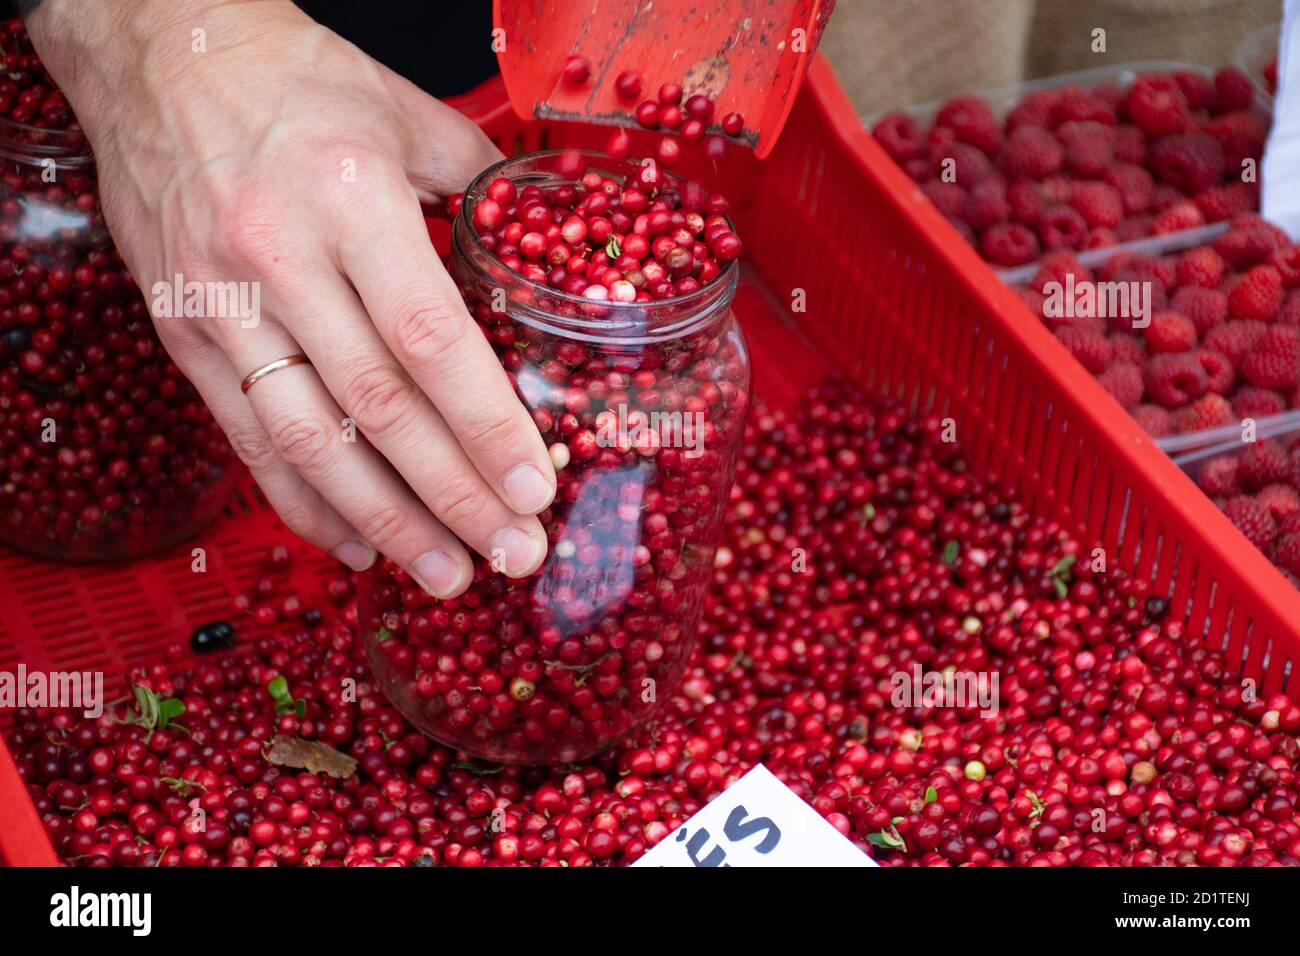 Red fresh healthy cranberries and lingonberries in a street food market ready for selling and eat, hand filling a glass jar Stock Photo